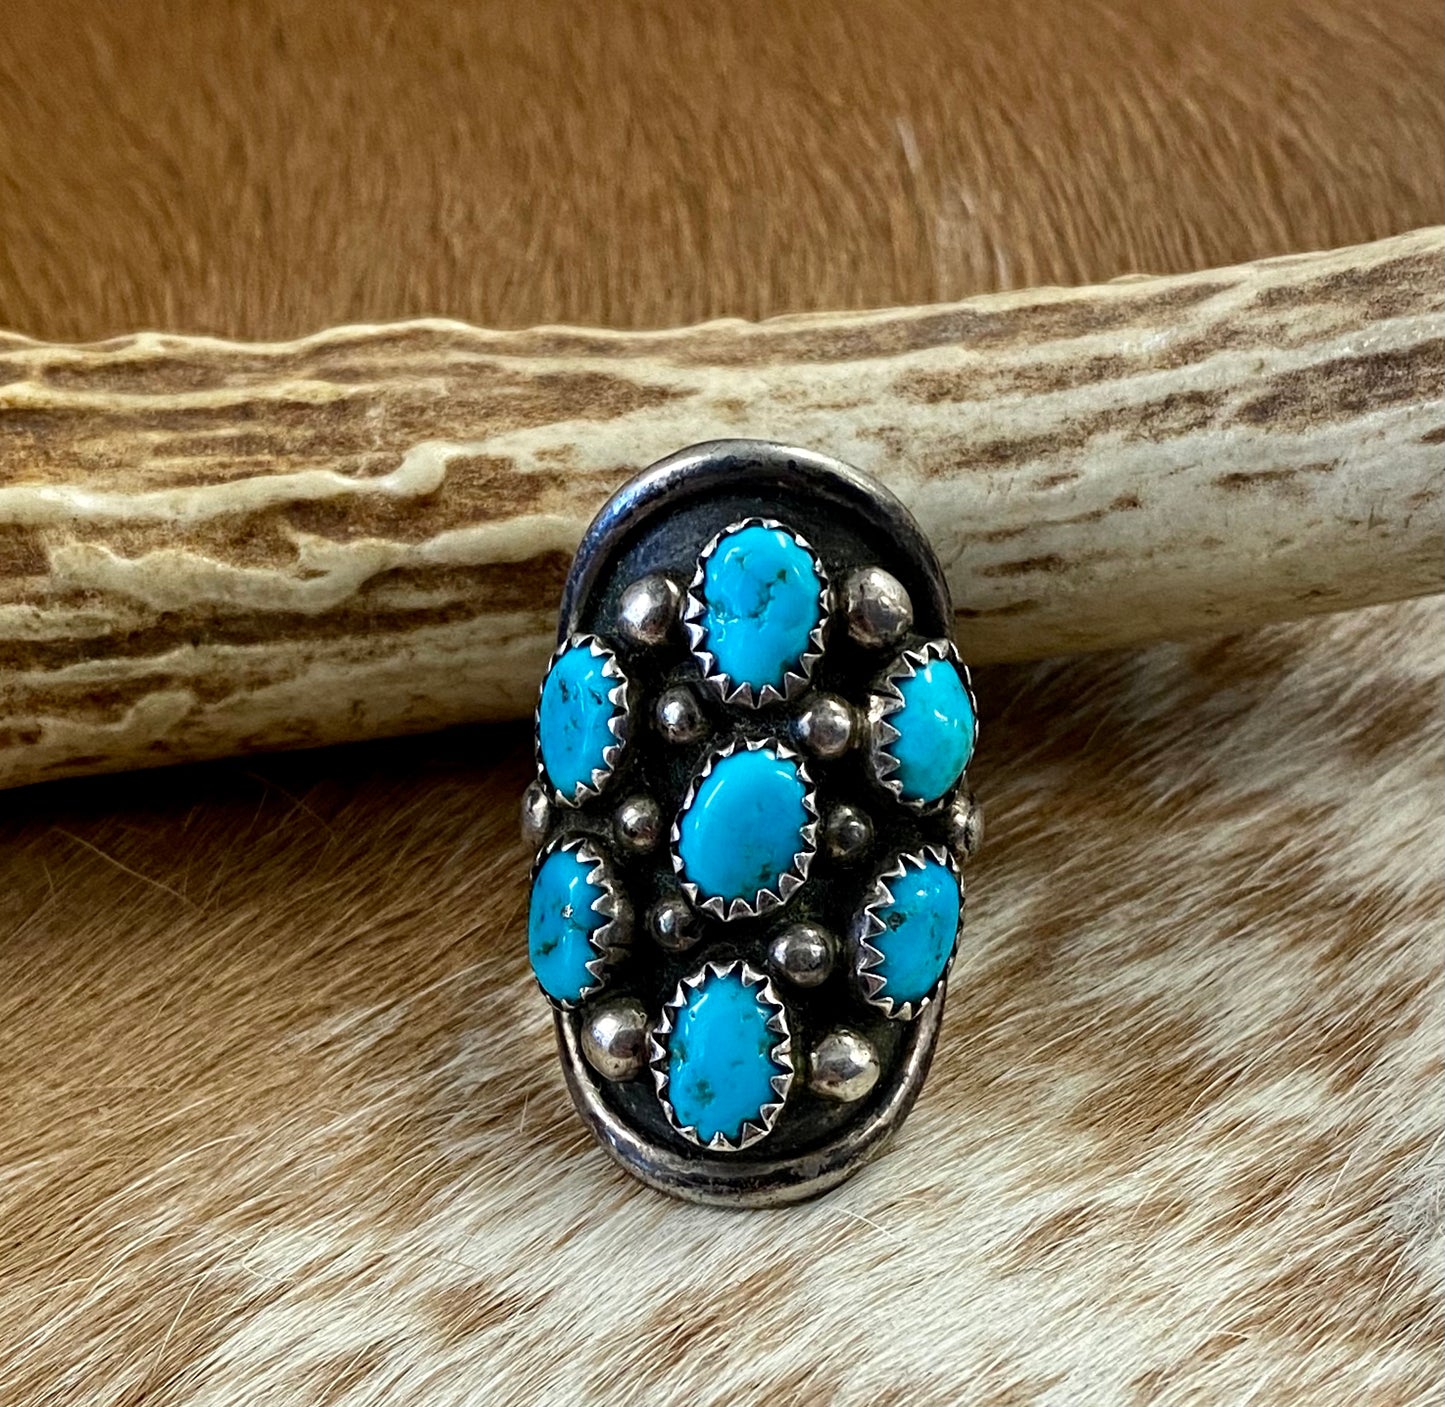 The Tiffany Turquoise Ring (Size 5.5) Signed EH